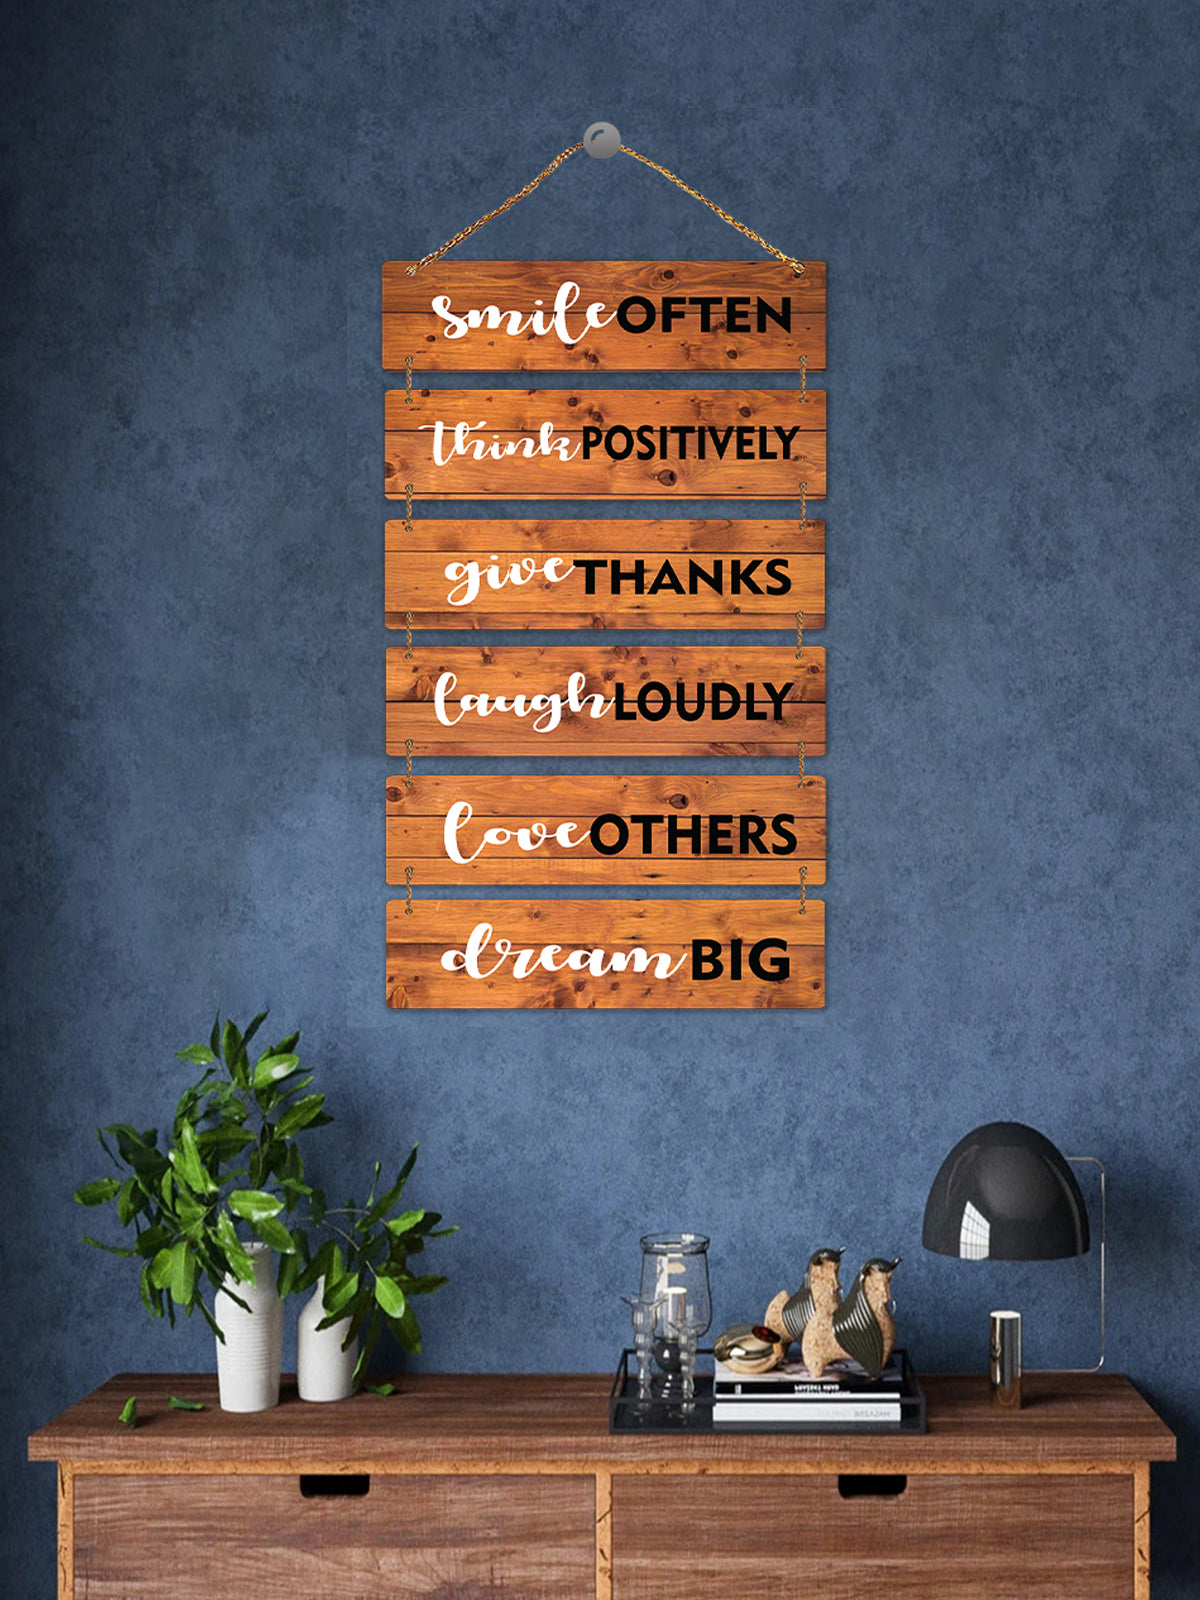 Smile Often, Think Positiively, Give Thanks, Laugh Loudly, Love Others, Dream Big 6 Blocks Wooden Wall Hanging